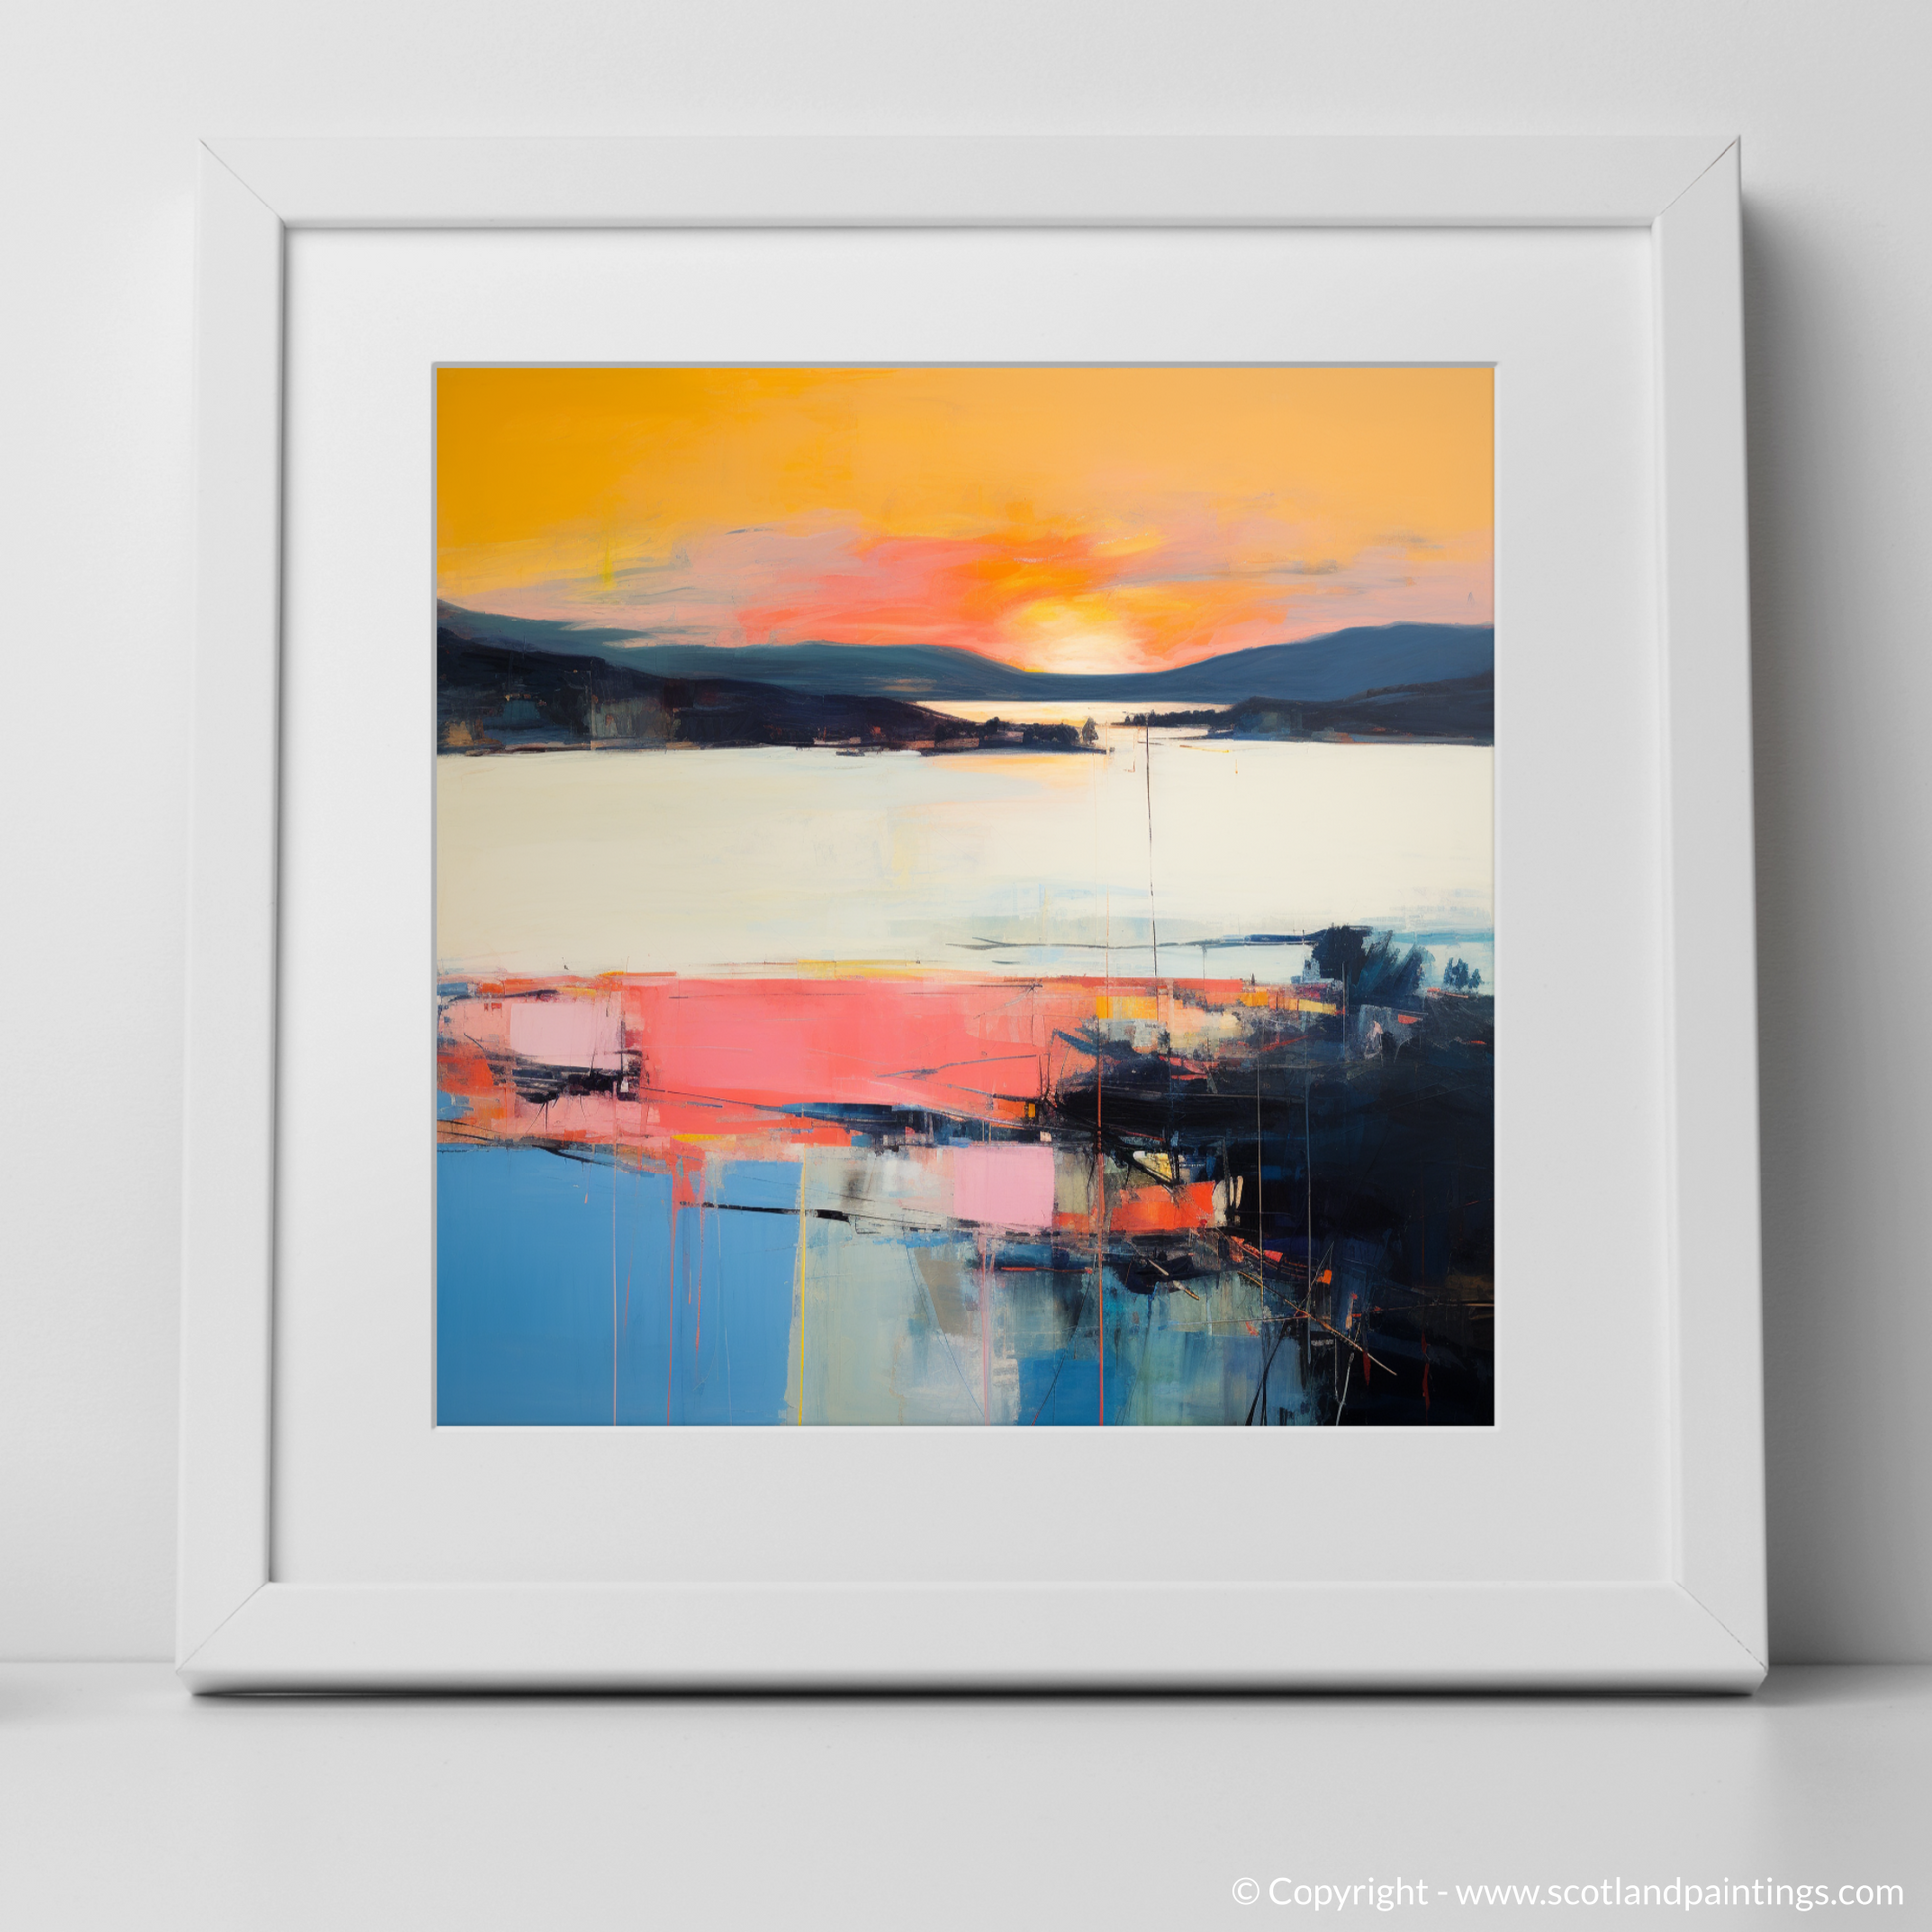 Art Print of Sunset over Loch Lomond with a white frame